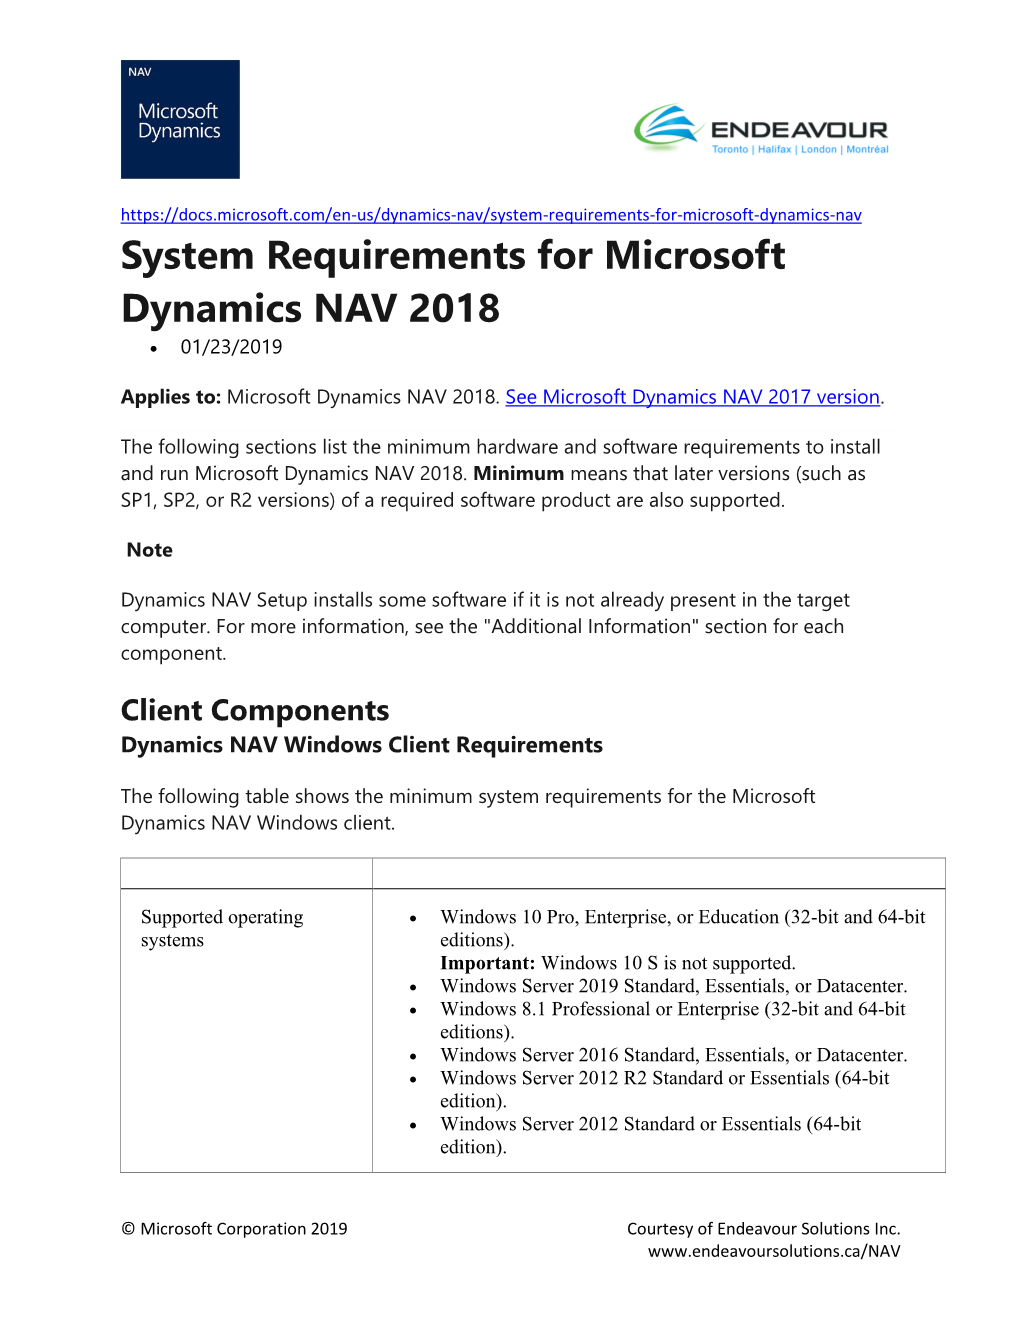 System Requirements for Microsoft Dynamics NAV 2018 • 01/23/2019